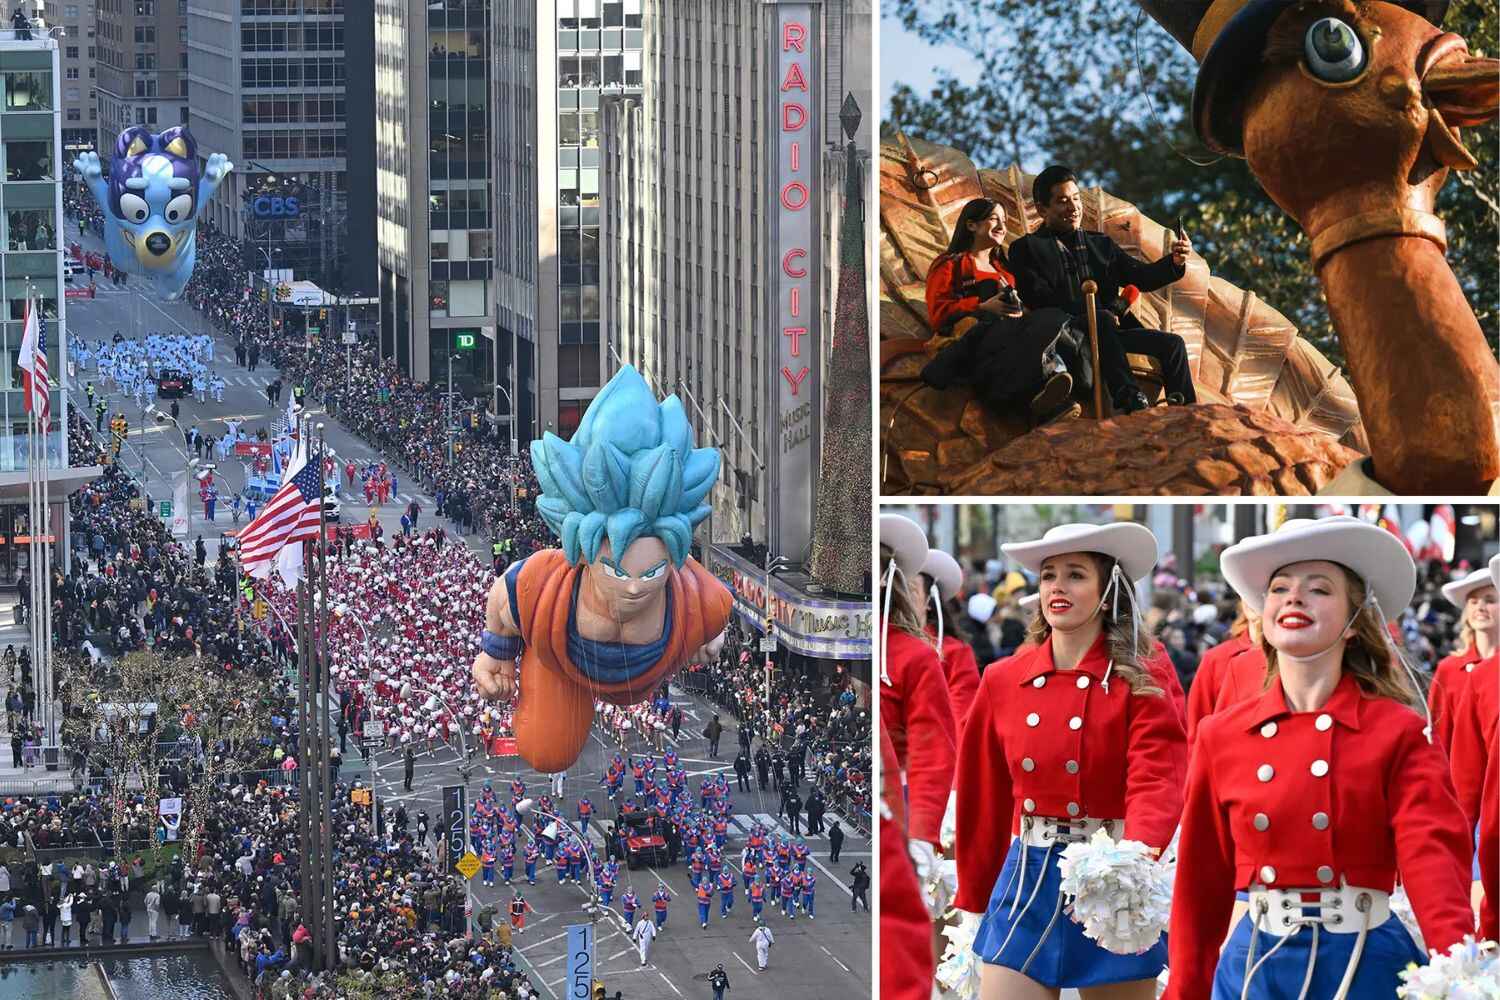 Macy’s Thanksgiving Day Parade Floats And Balloons Ready To Amaze The Crowds